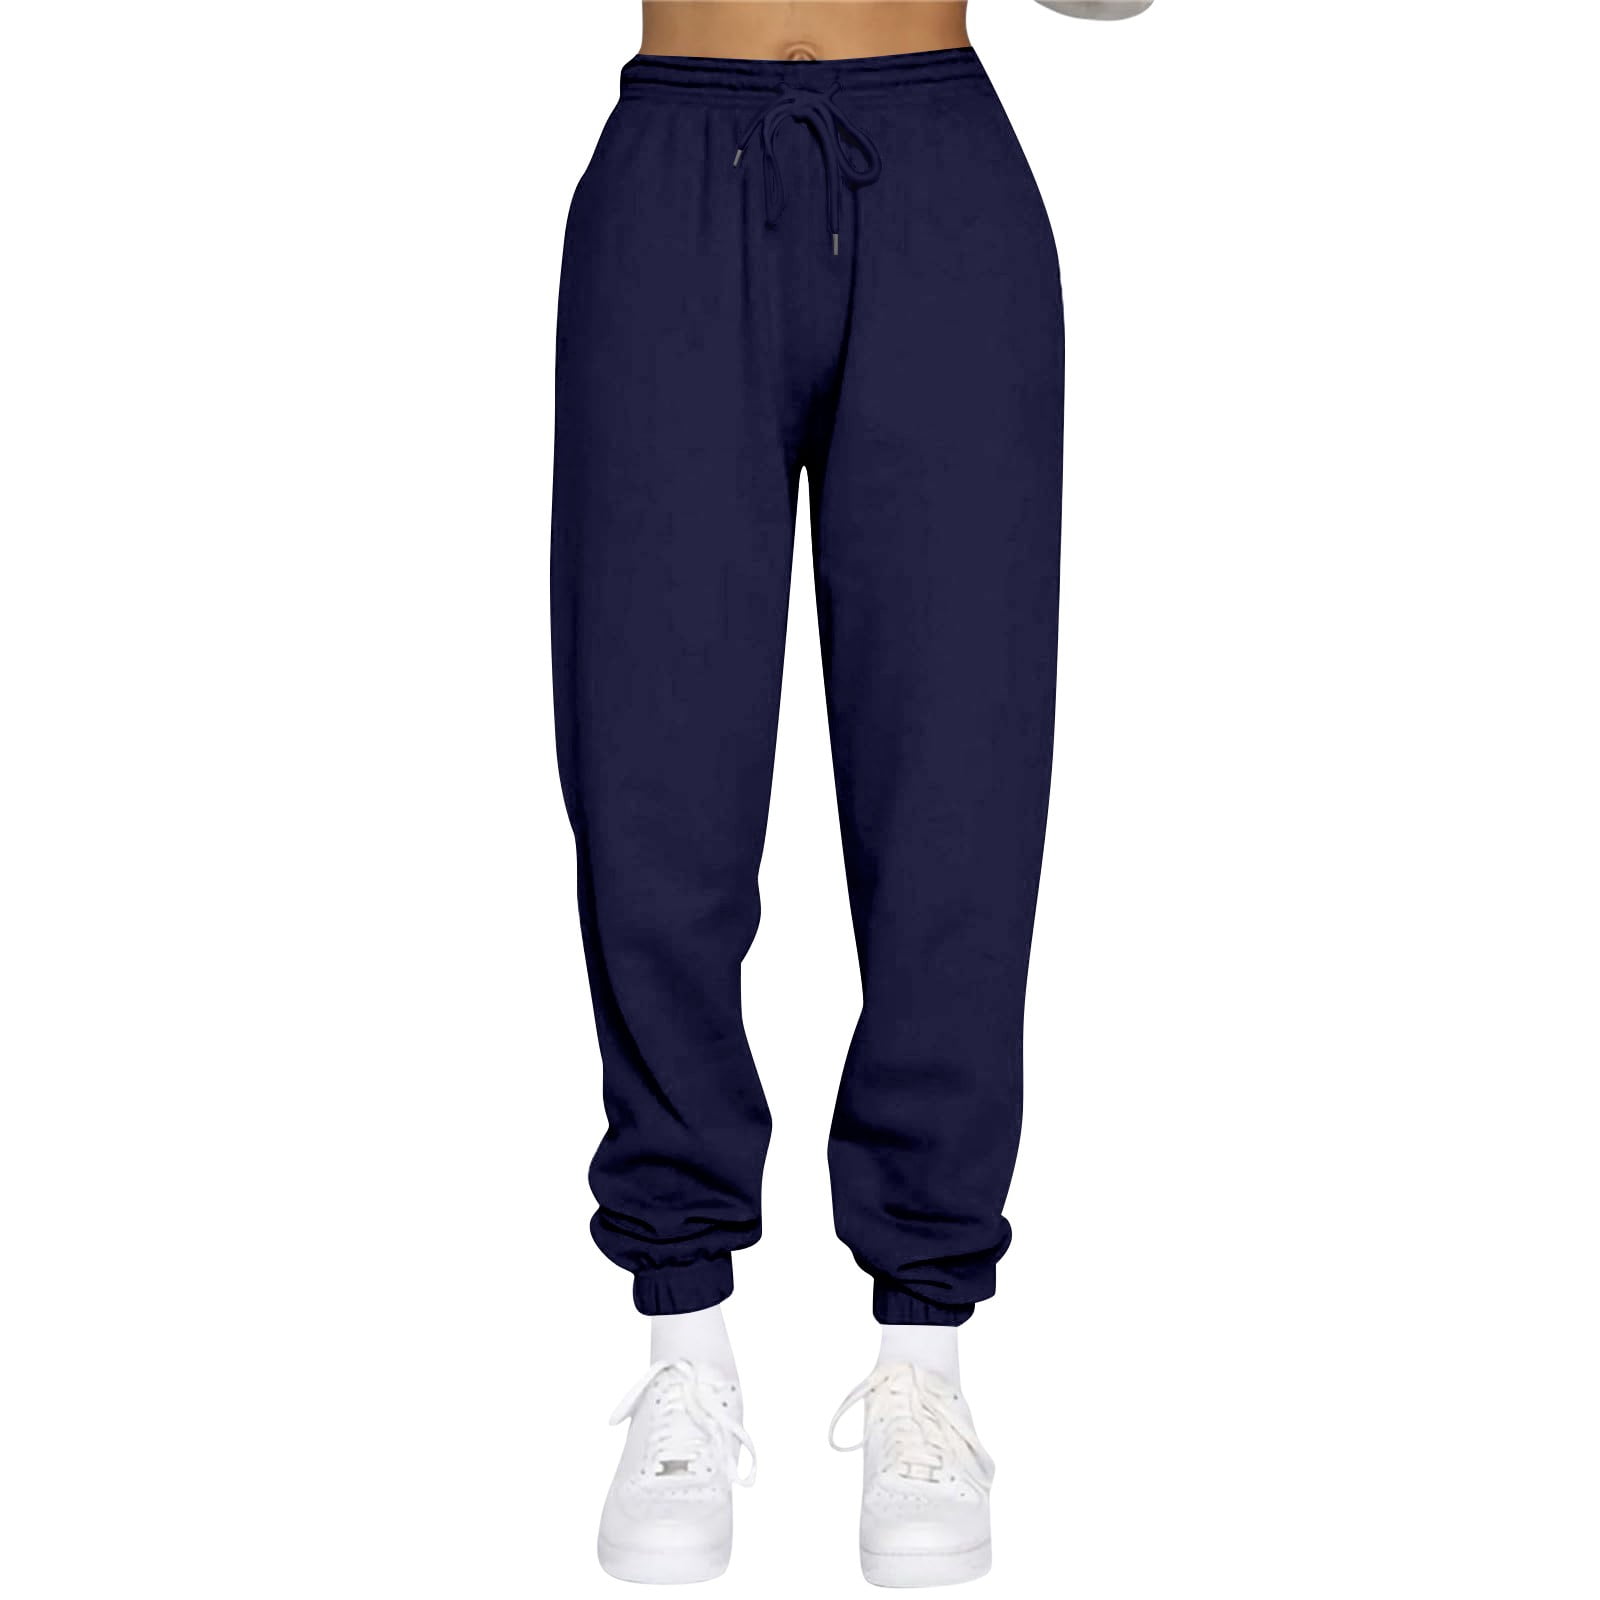 TQWQT Women's Sweatpants Fleece Baggy Casual High Waisted Workout Athletic  Cinch Bottom Comfy Fall Joggers Pants with Pocket Red 2XL 